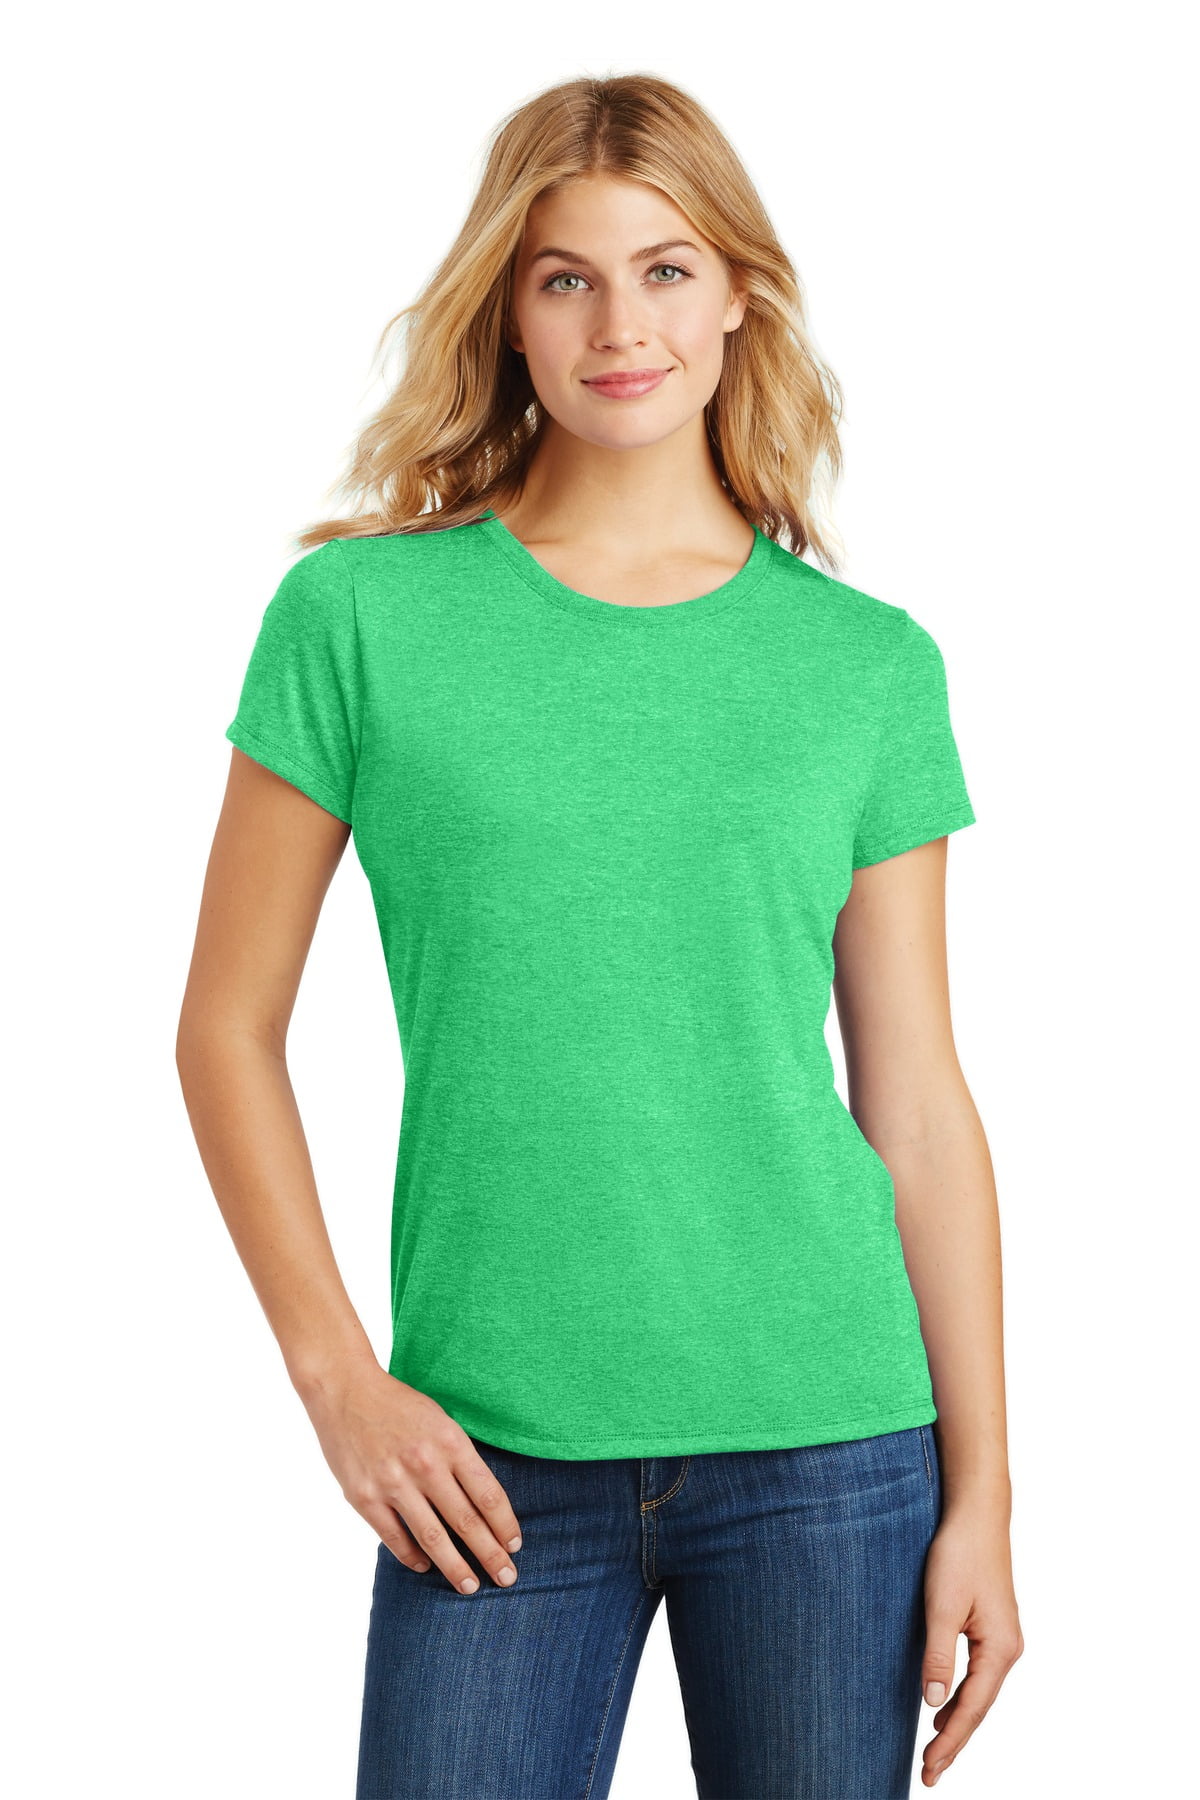 JustBlanks Women’s The Perfect Comfy Tri Tee Shirt Shoulder to Shoulder ...